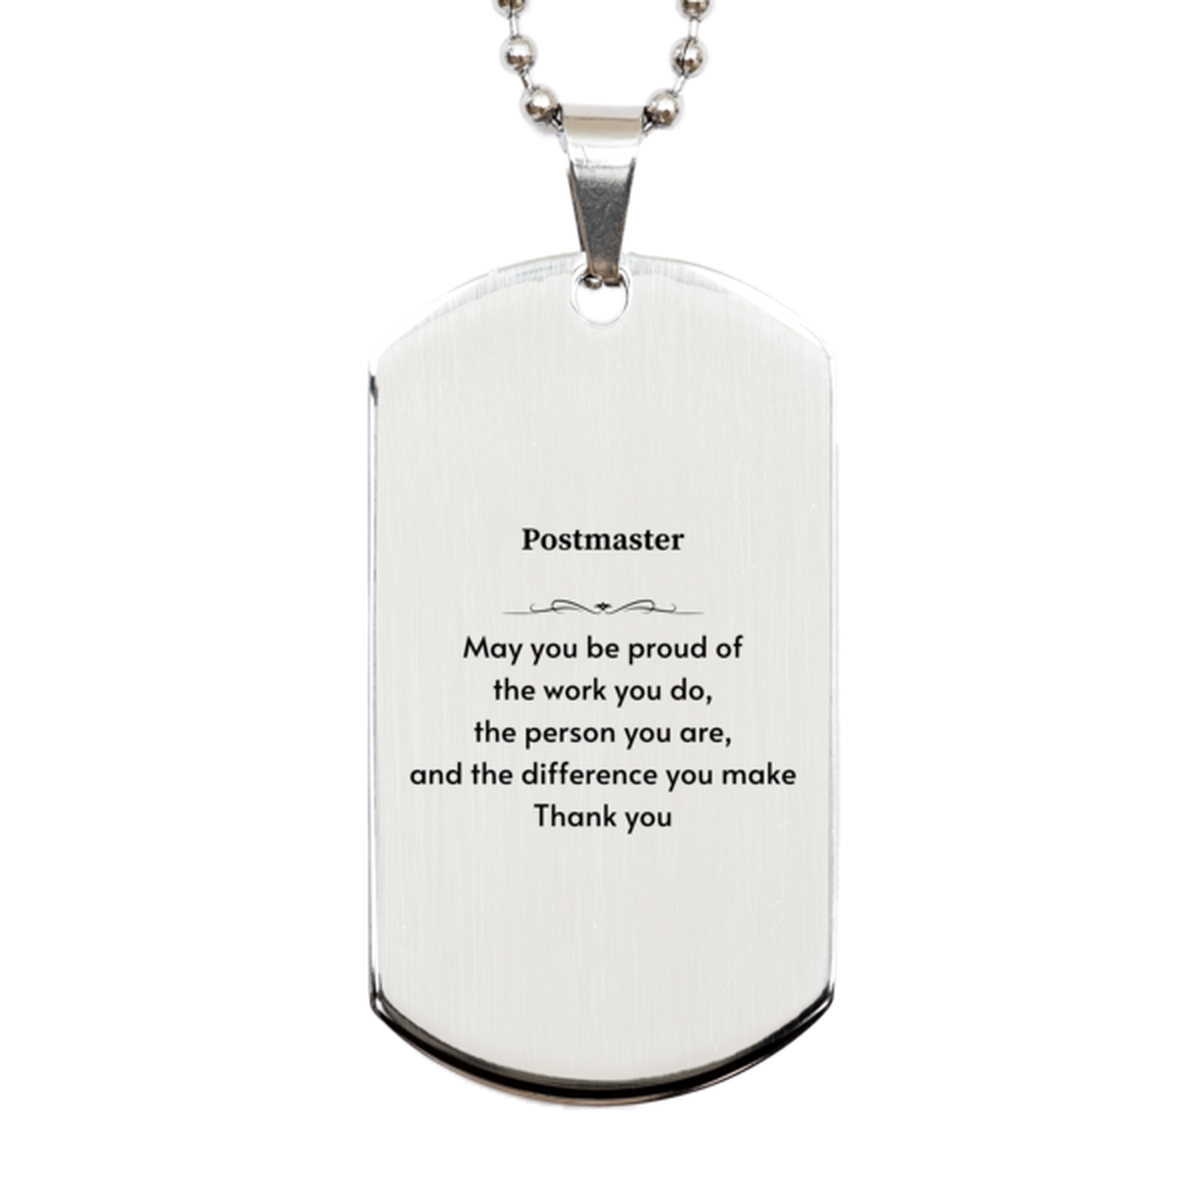 Heartwarming Silver Dog Tag Retirement Coworkers Gifts for Postmaster, Postmaster May You be proud of the work you do, the person you are Gifts for Boss Men Women Friends